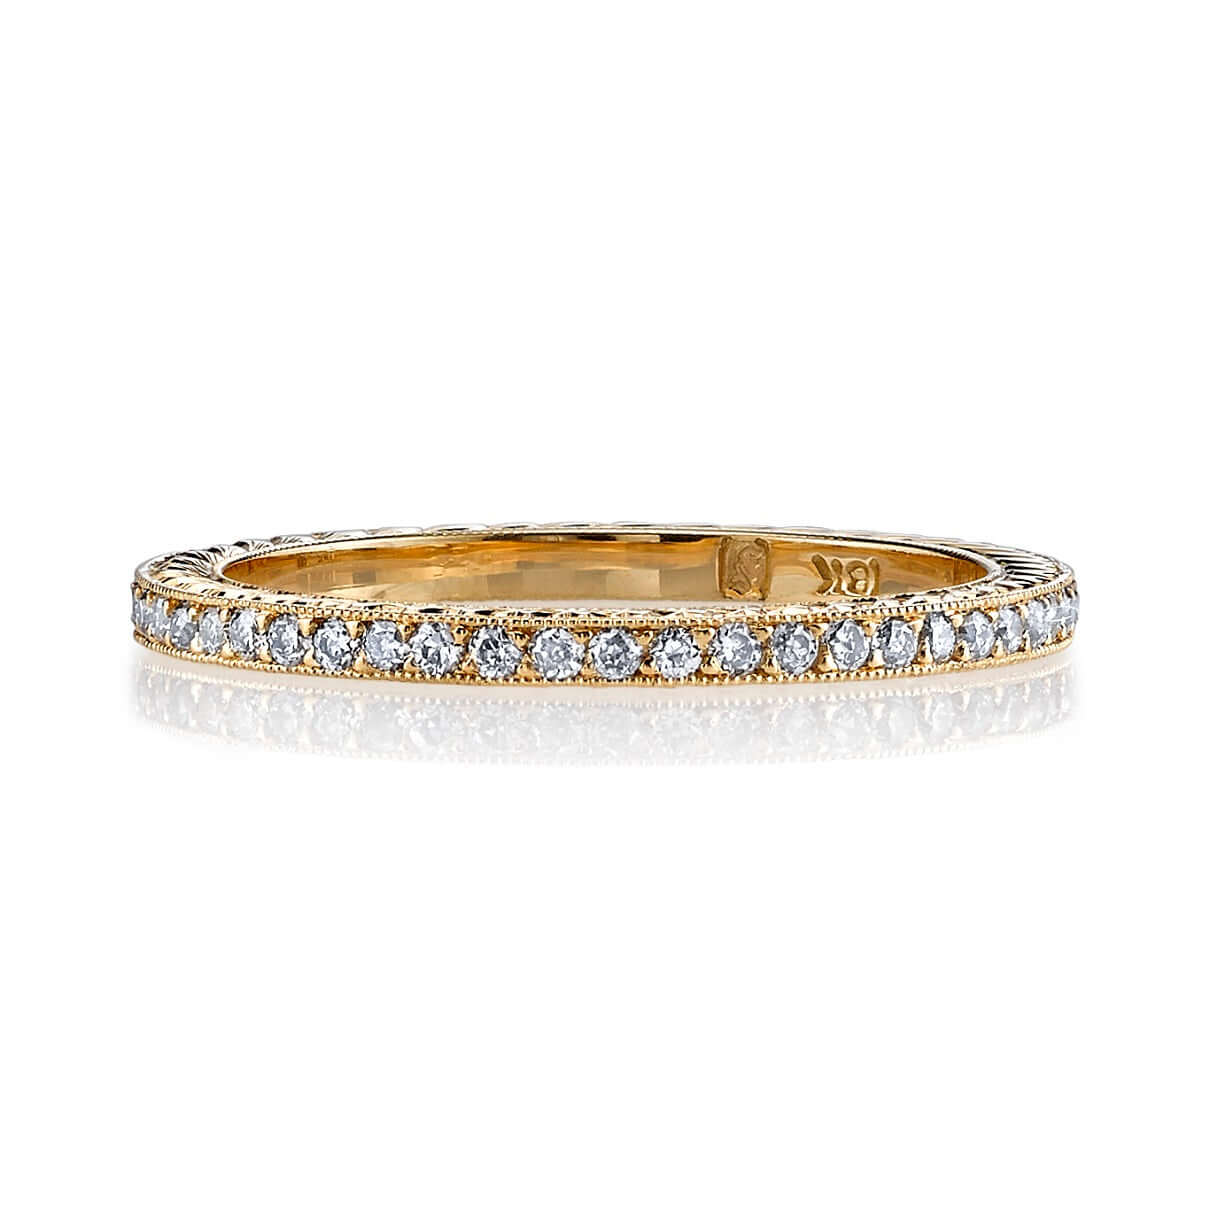 SINGLE STONE MOLLY BAND | Approximately 0.40ctw G-H/VS old European cut diamonds set in an handcrafted eternity band featuring engraved sidewalls. Approximate band with 1.6mm. Please inquire for additional customization.